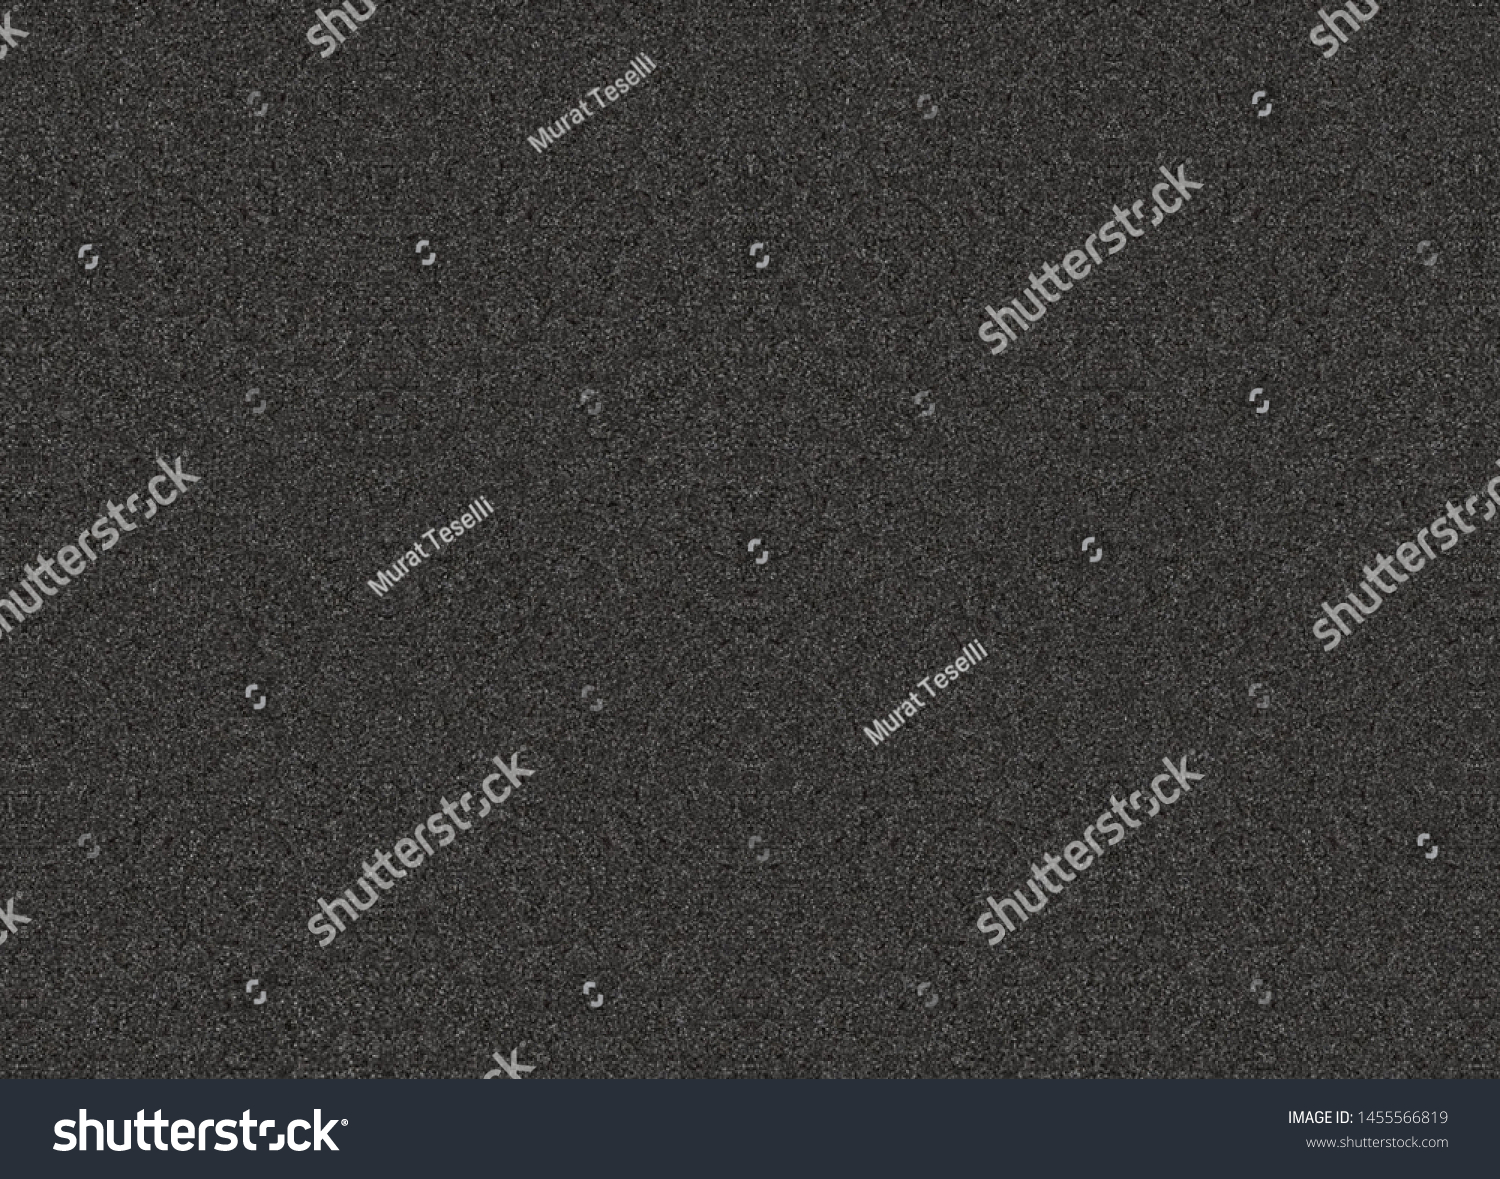 Black abstract texture background design  #1455566819